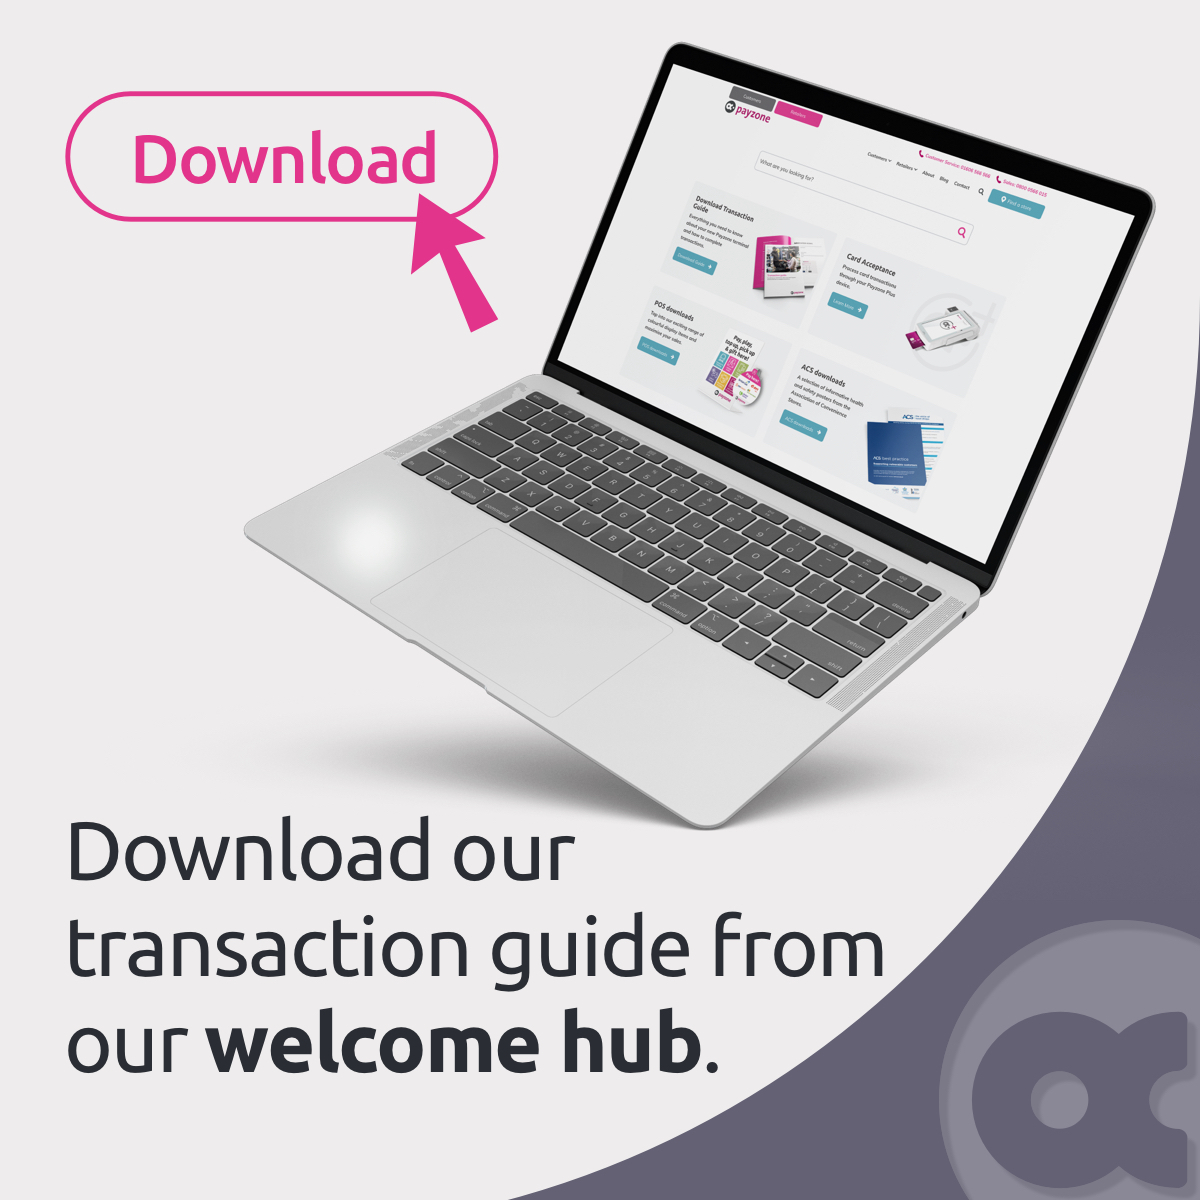 If you’re struggling with certain aspects of your new Payzone device, everything you need to know, including how to complete transactions, is available in the Transaction Guide. Download it here from the welcome hub ⬇️ payzone.co.uk/welcome/ #payzonetips